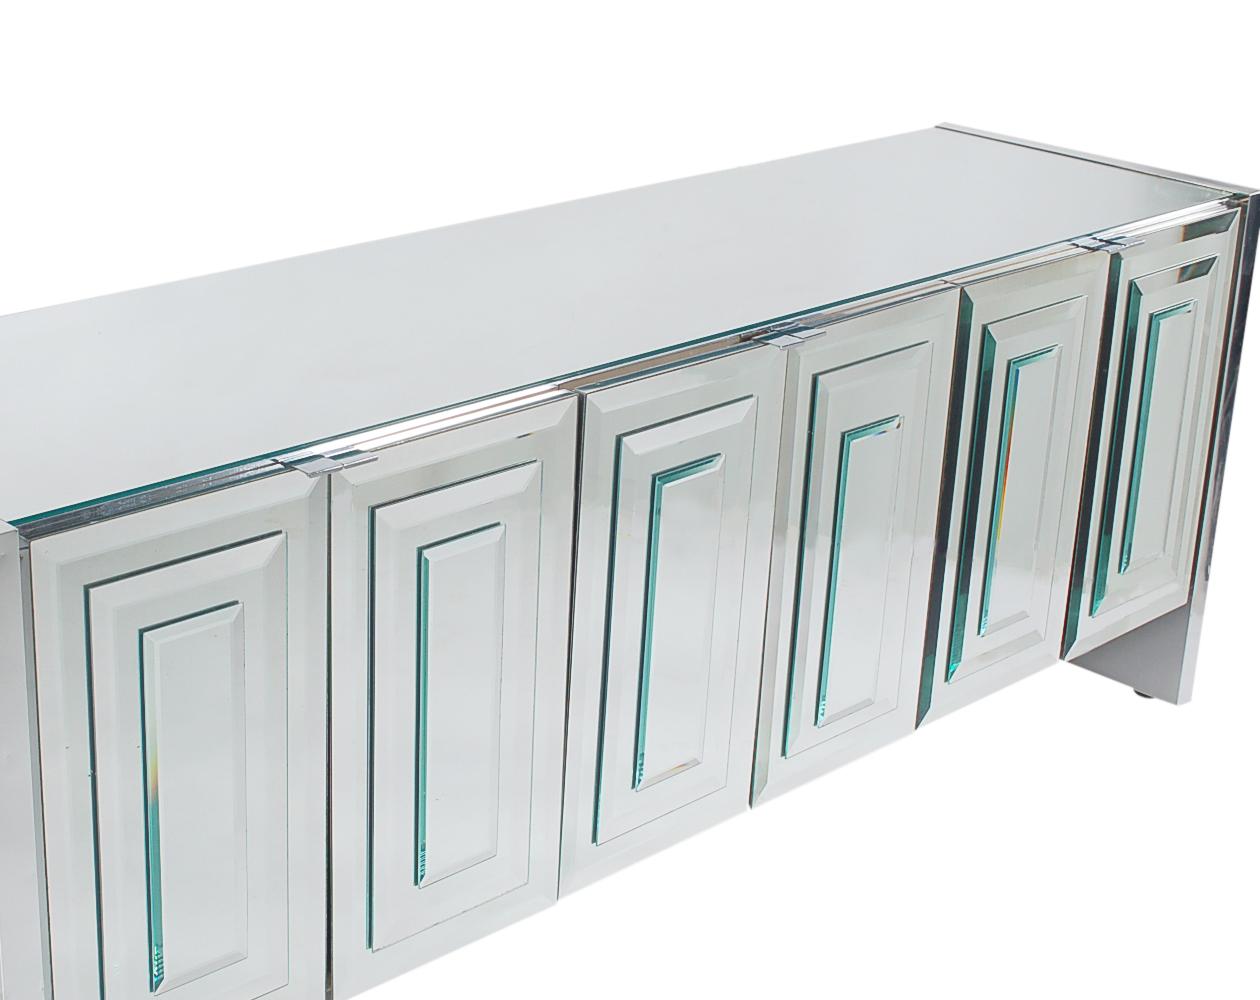 Hollywood Regency Modern Mirrored Art Deco Credenza or Cabinet by Ello Furniture im Zustand „Gut“ in Philadelphia, PA